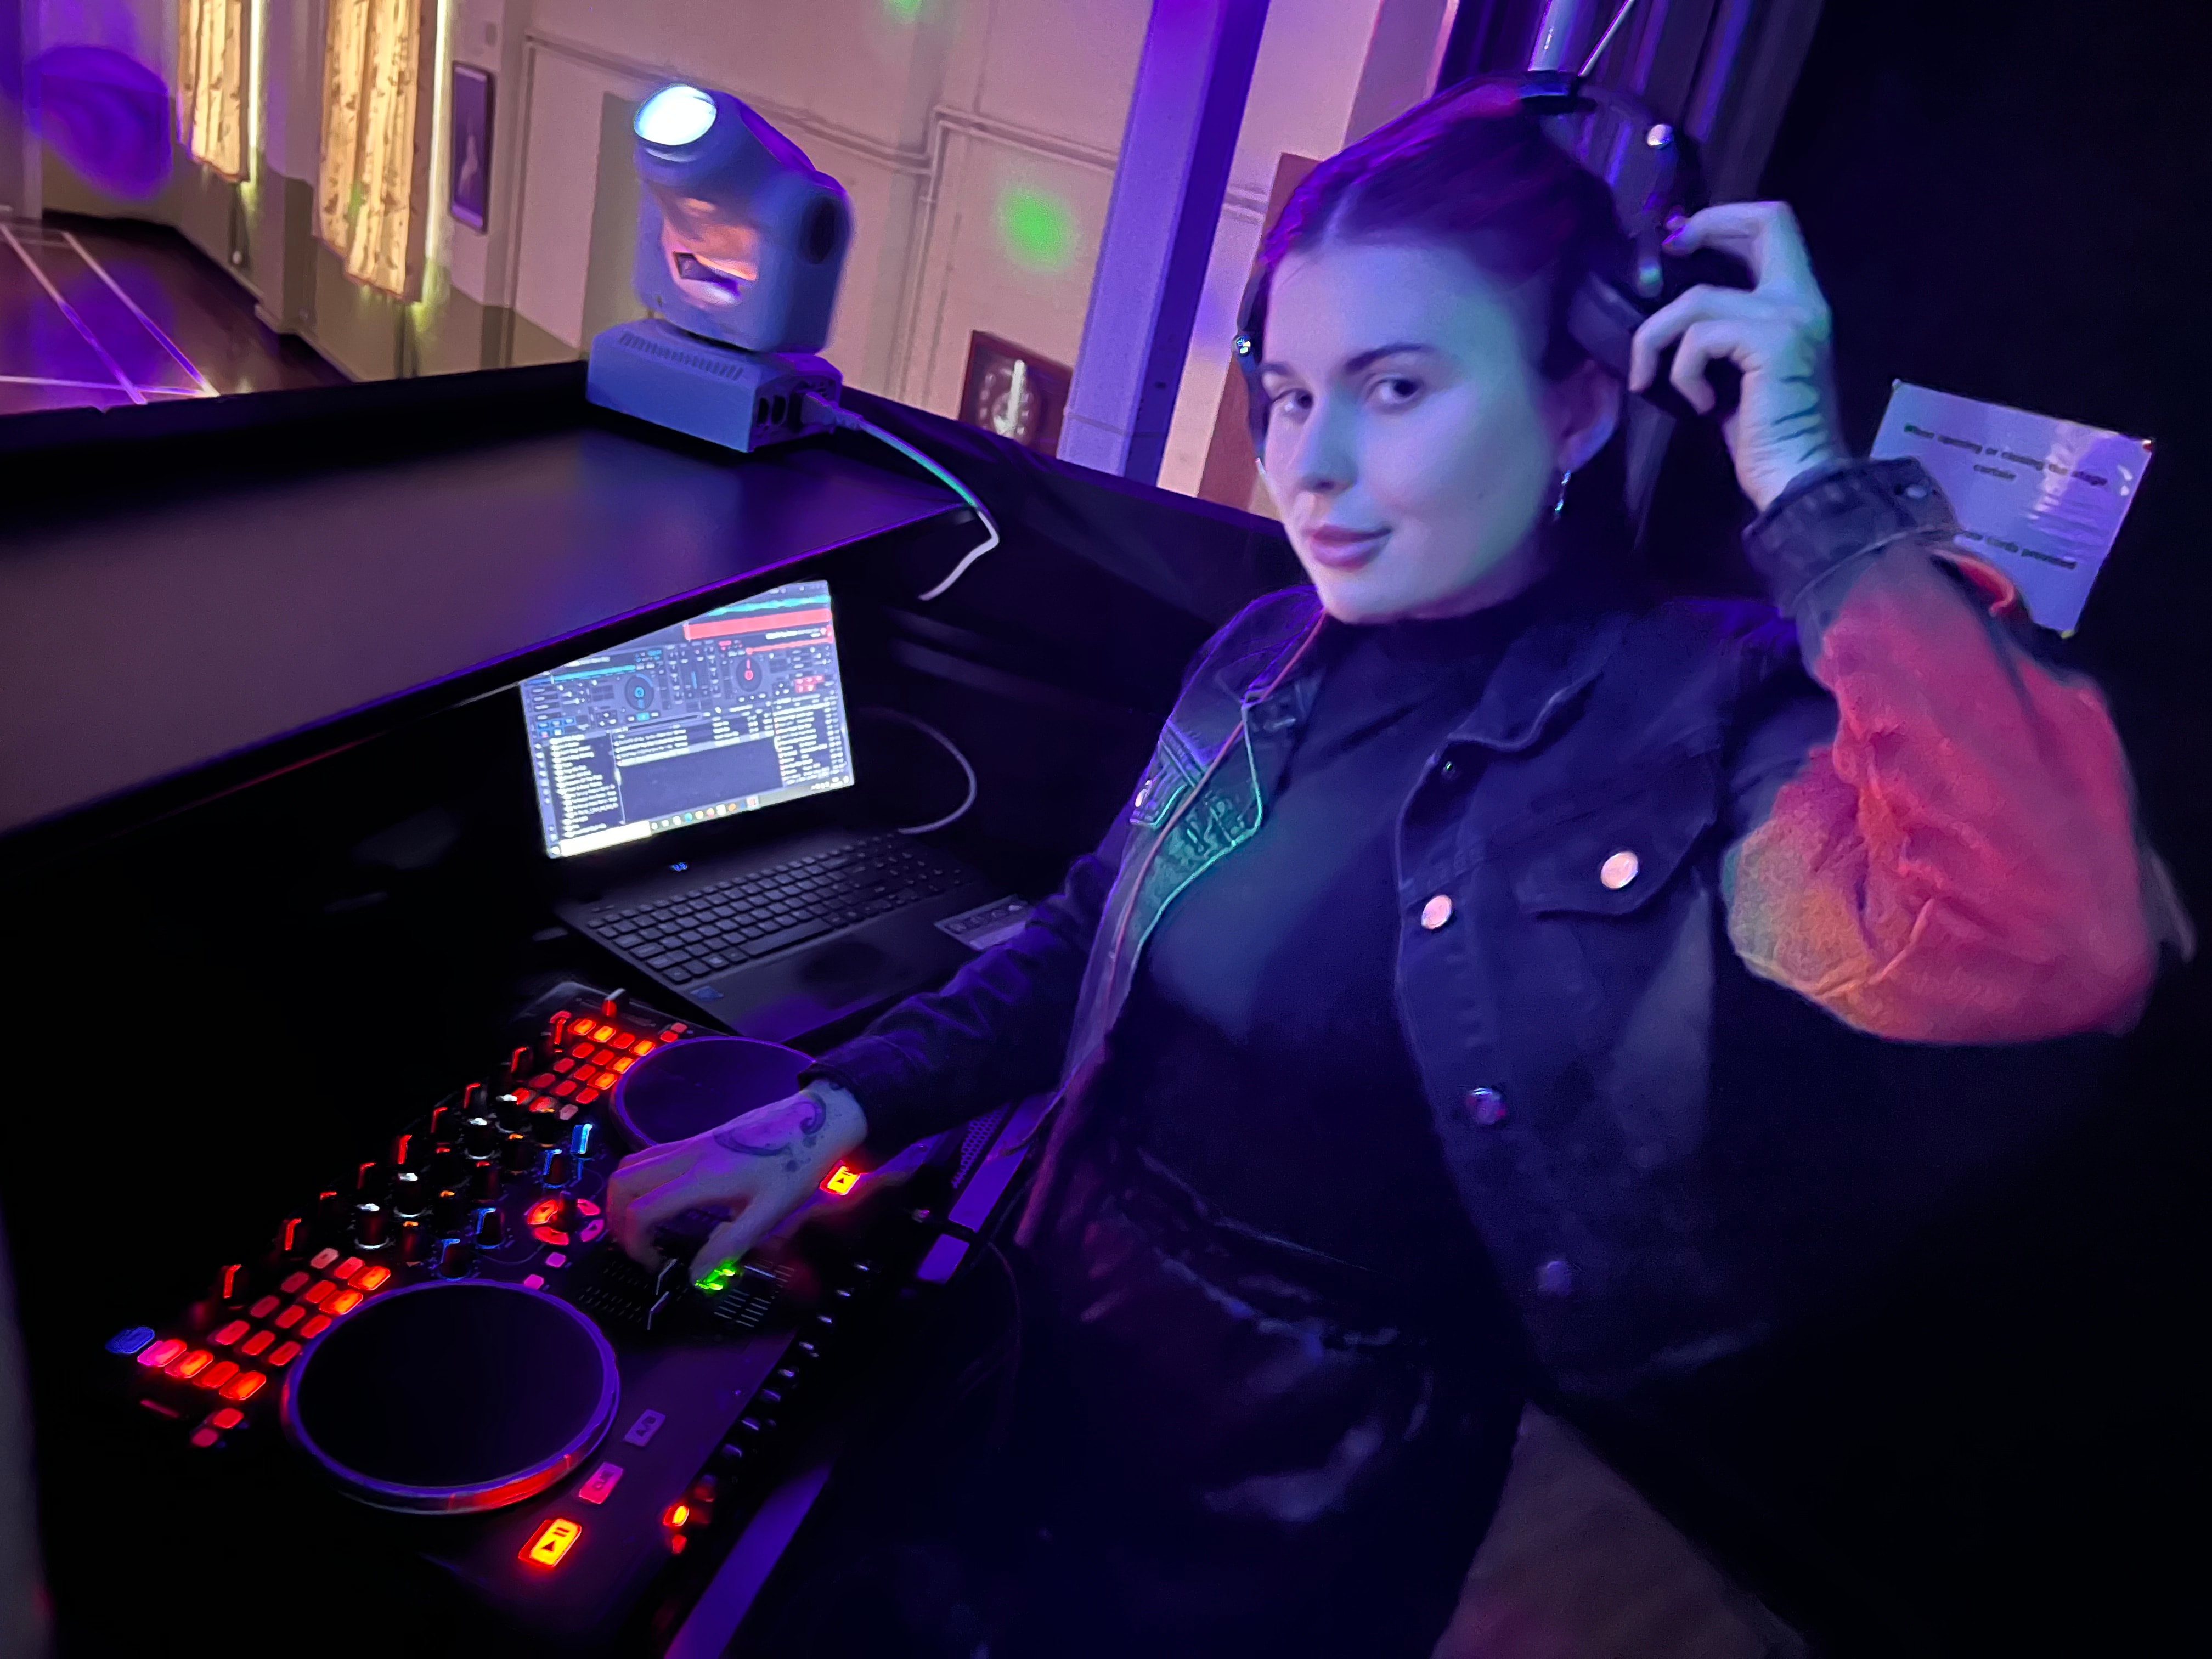 Experienced & Versatile DJ Elizmi Playing Music Suited to Your Event